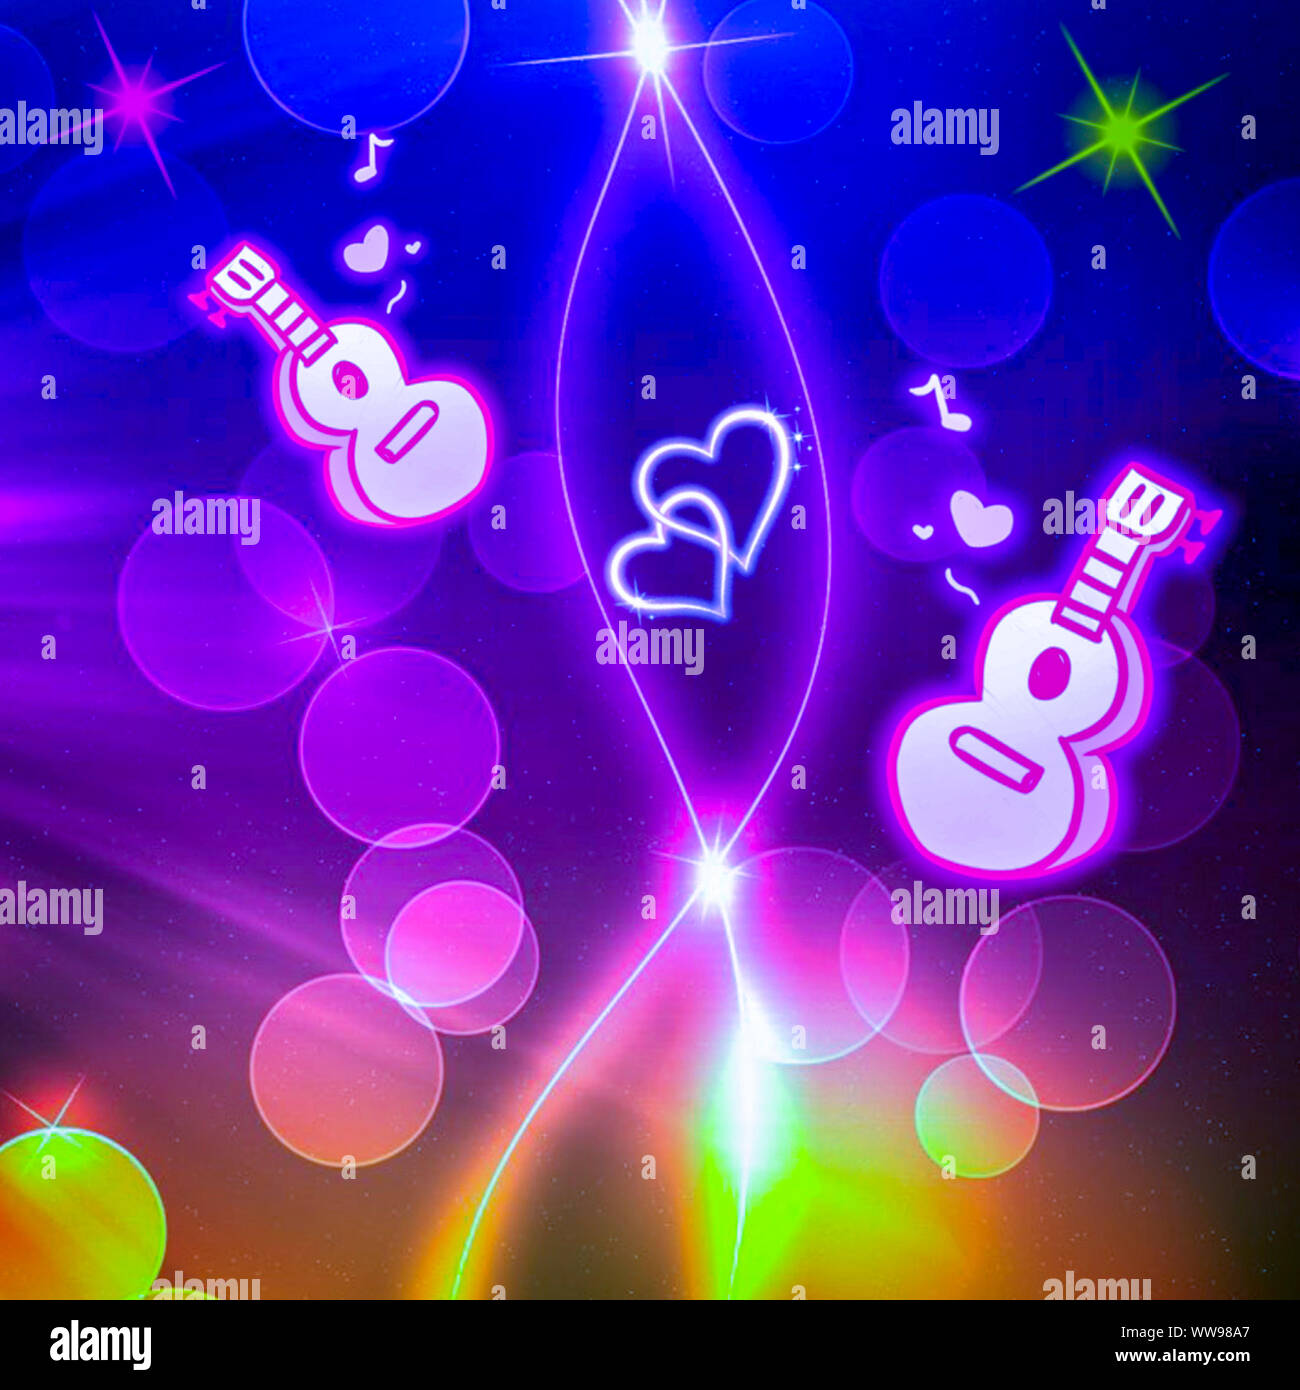 keep calm and love music wallpapers